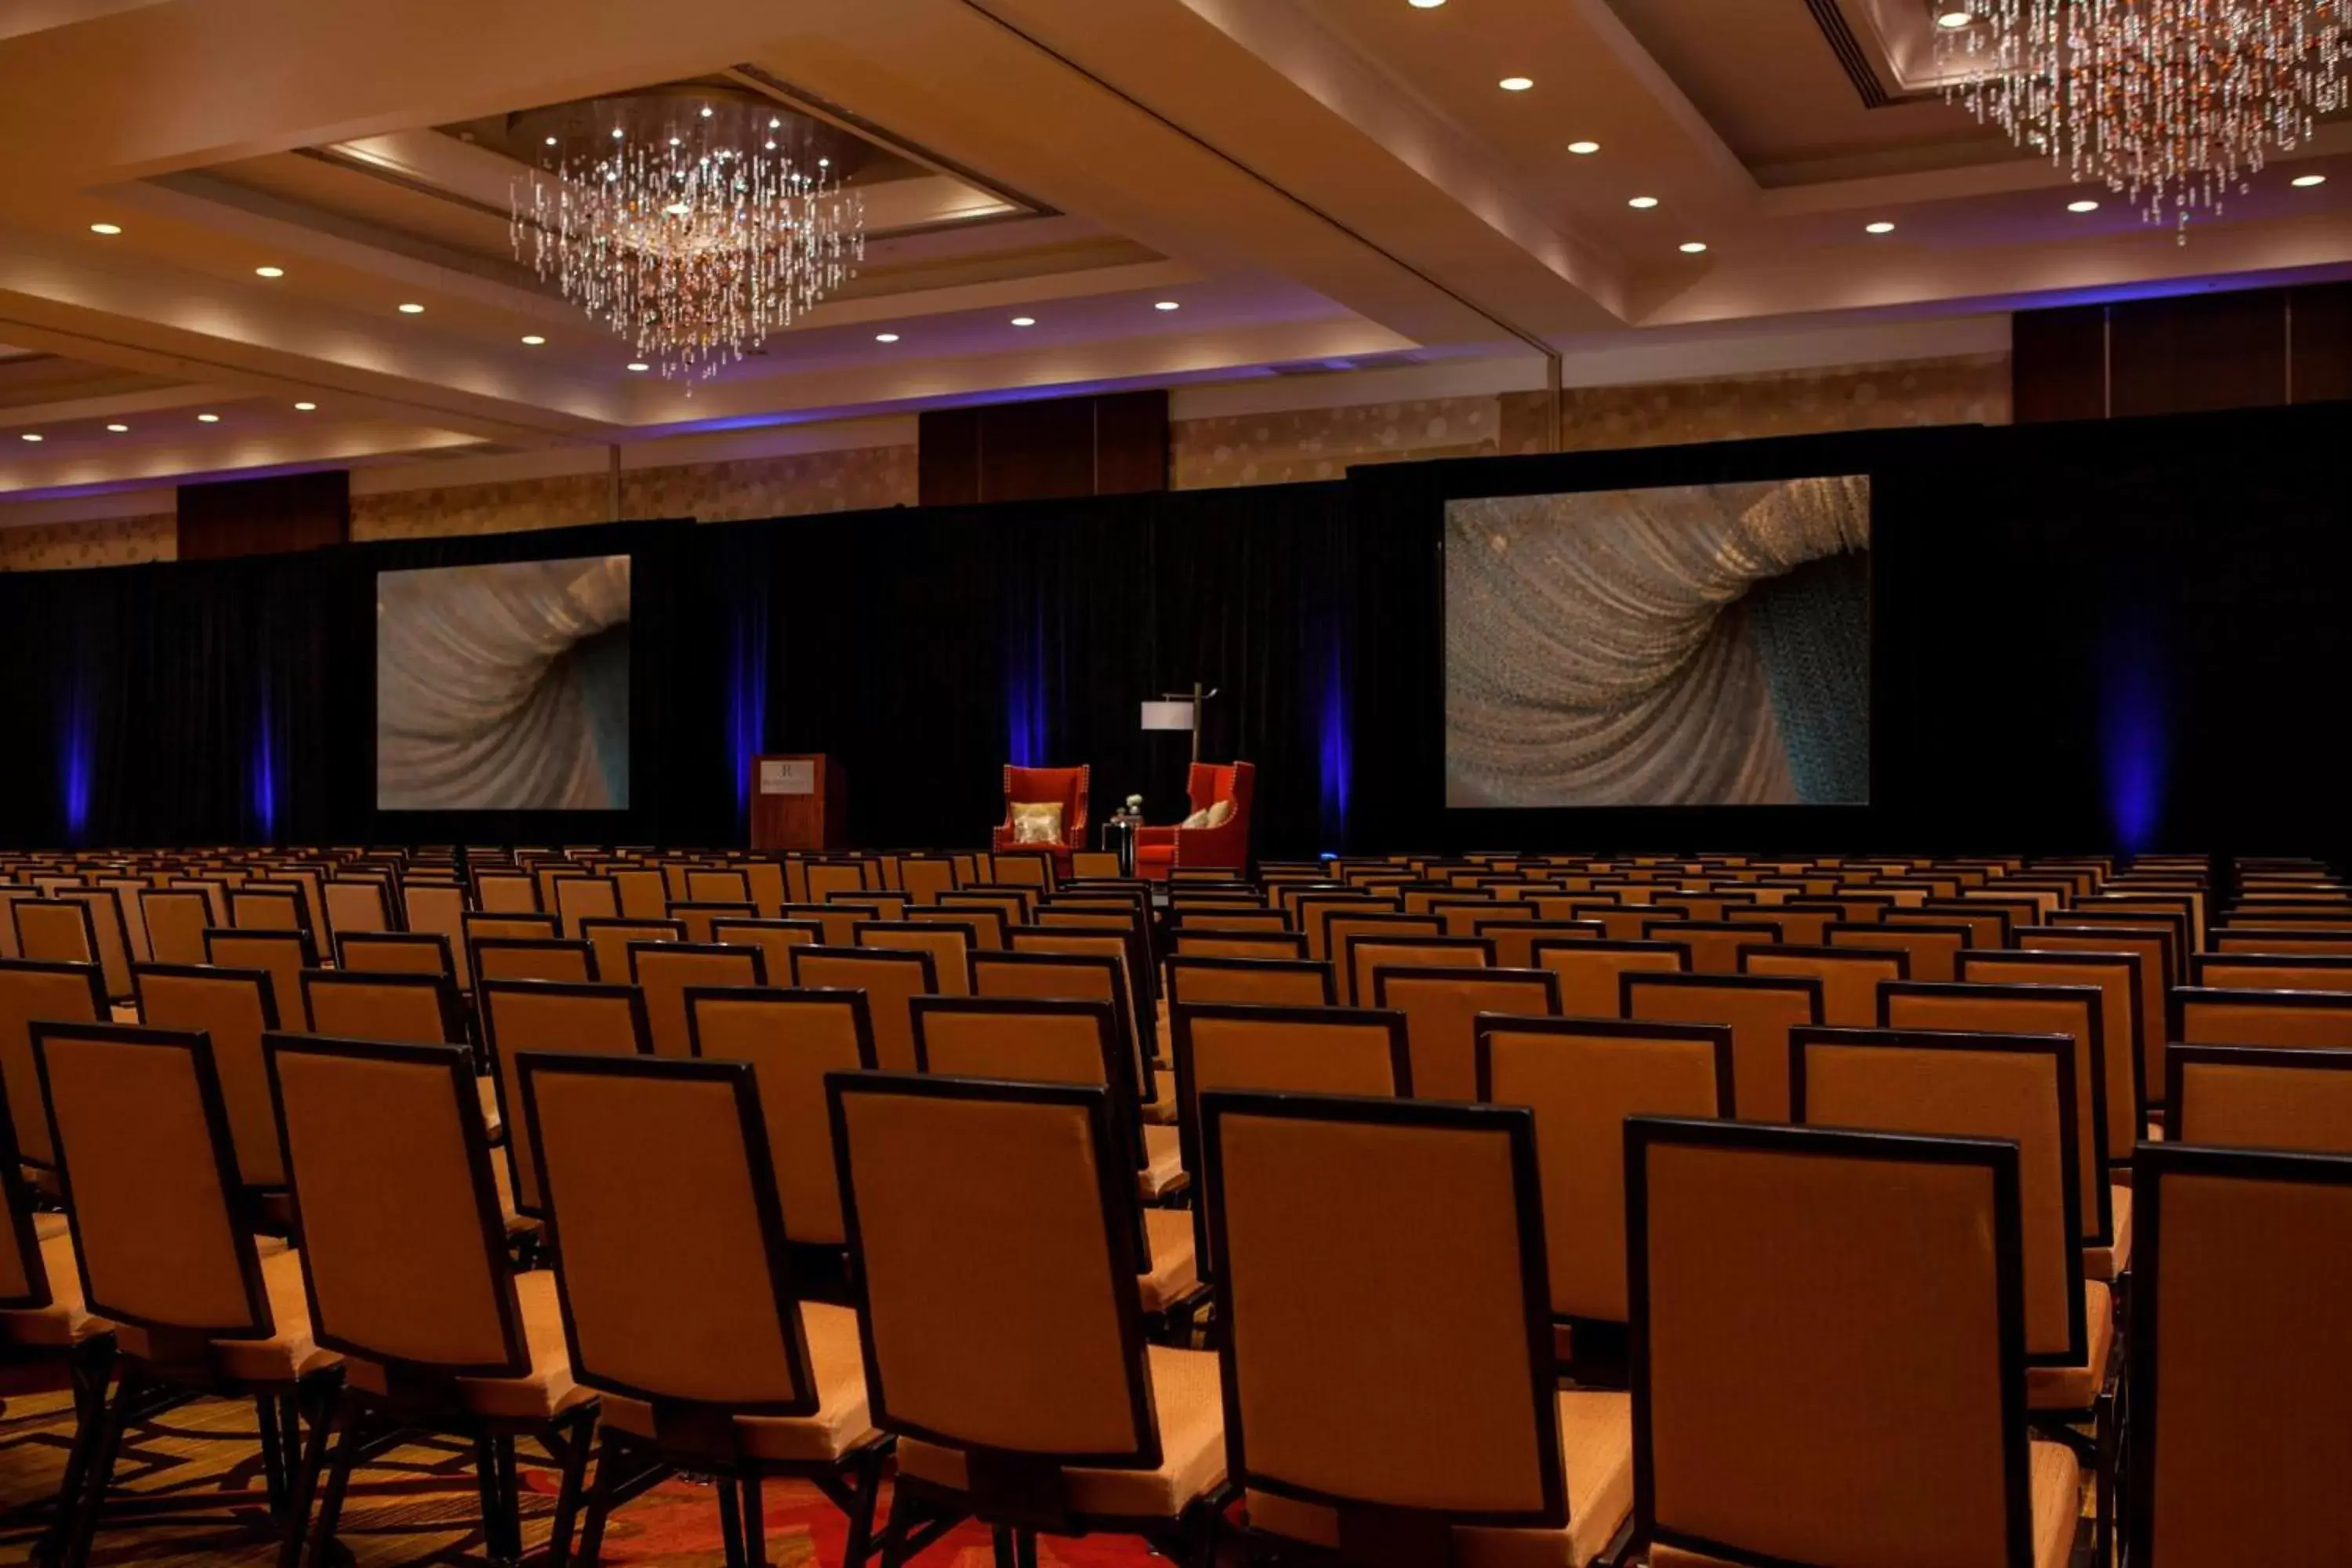 Meeting/conference room, Banquet Facilities in Renaissance Baton Rouge Hotel